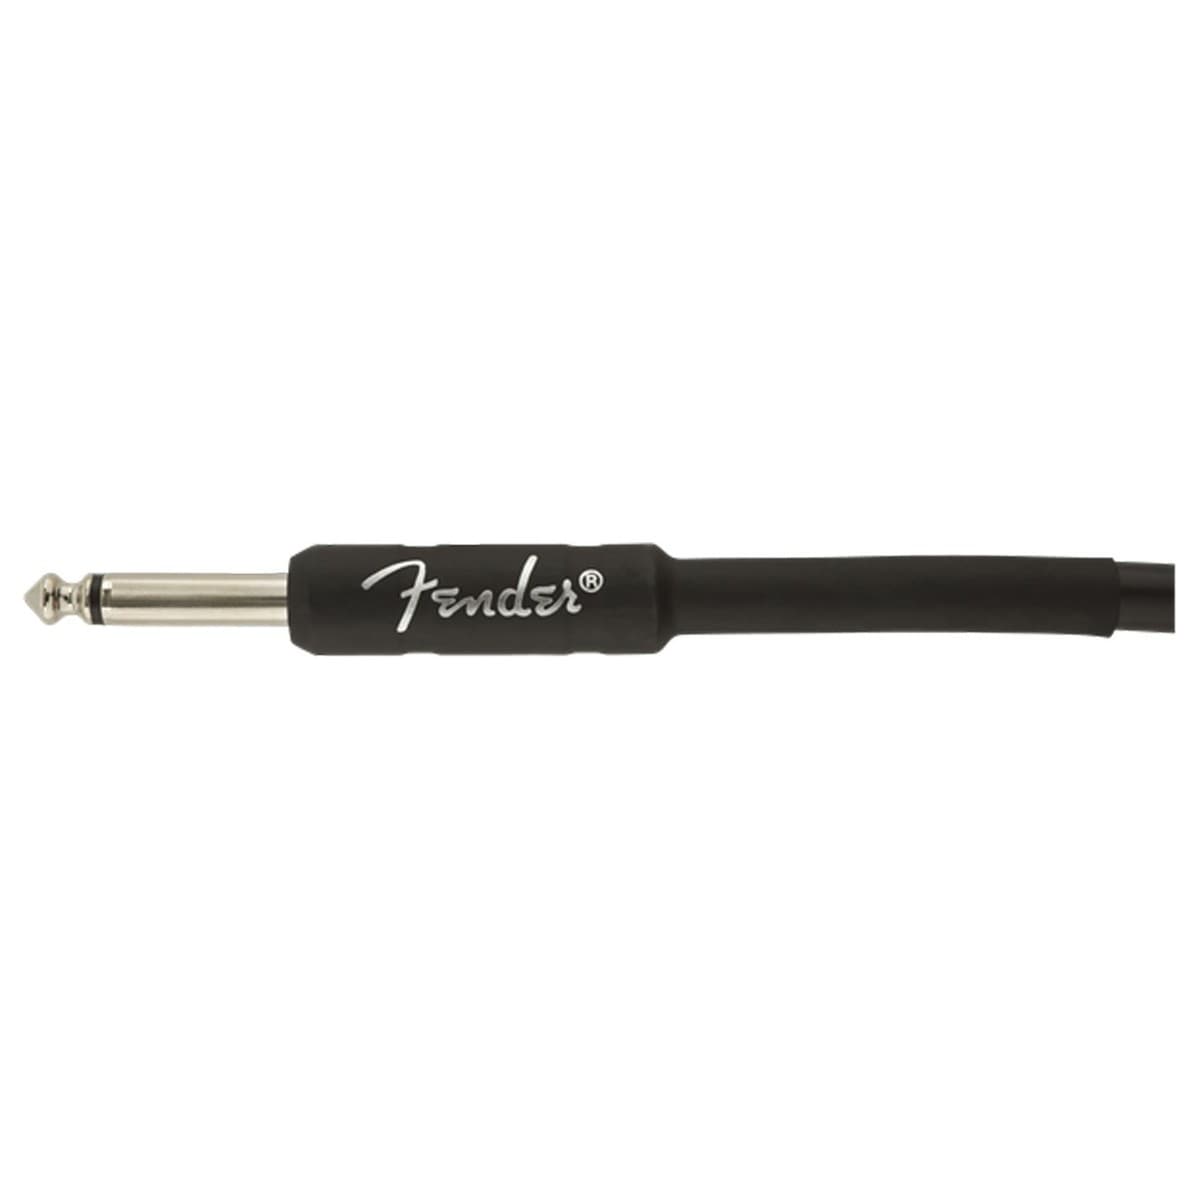 Fender Professional Series Instrument Cable - Straight - 5.5m 18.6ft - Black